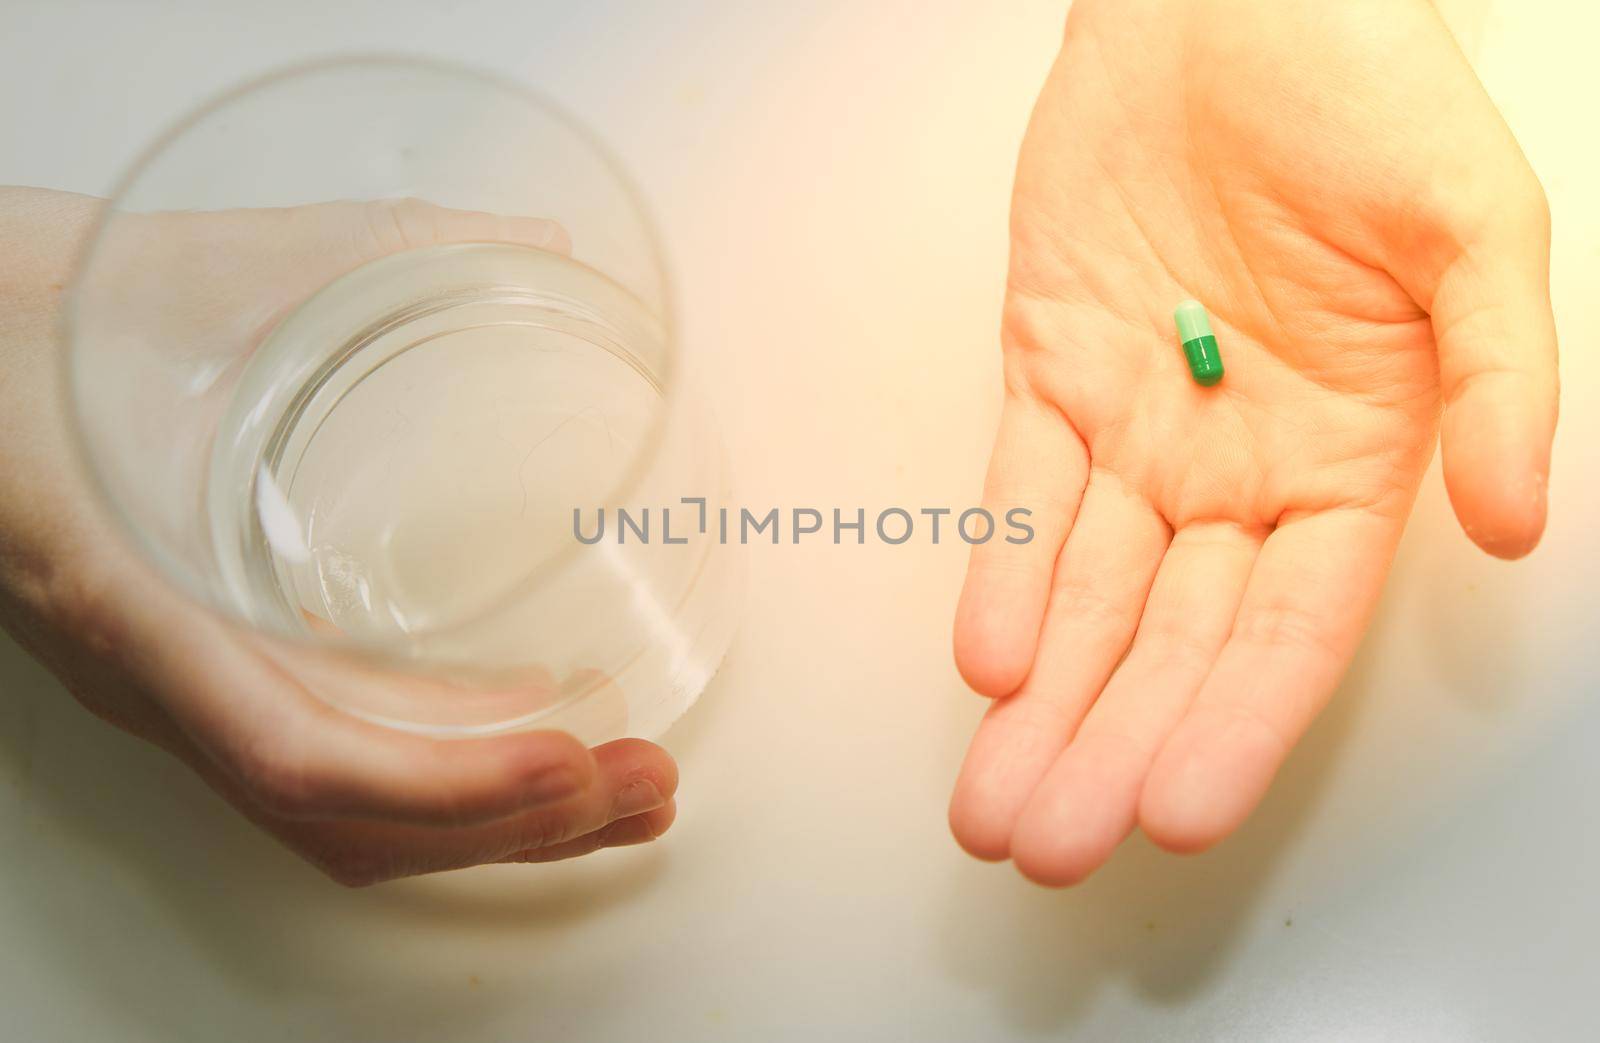 woman hand hold pill supplement antioxidant vitamin mineral capsule with water glass before take medicine capsule for health care